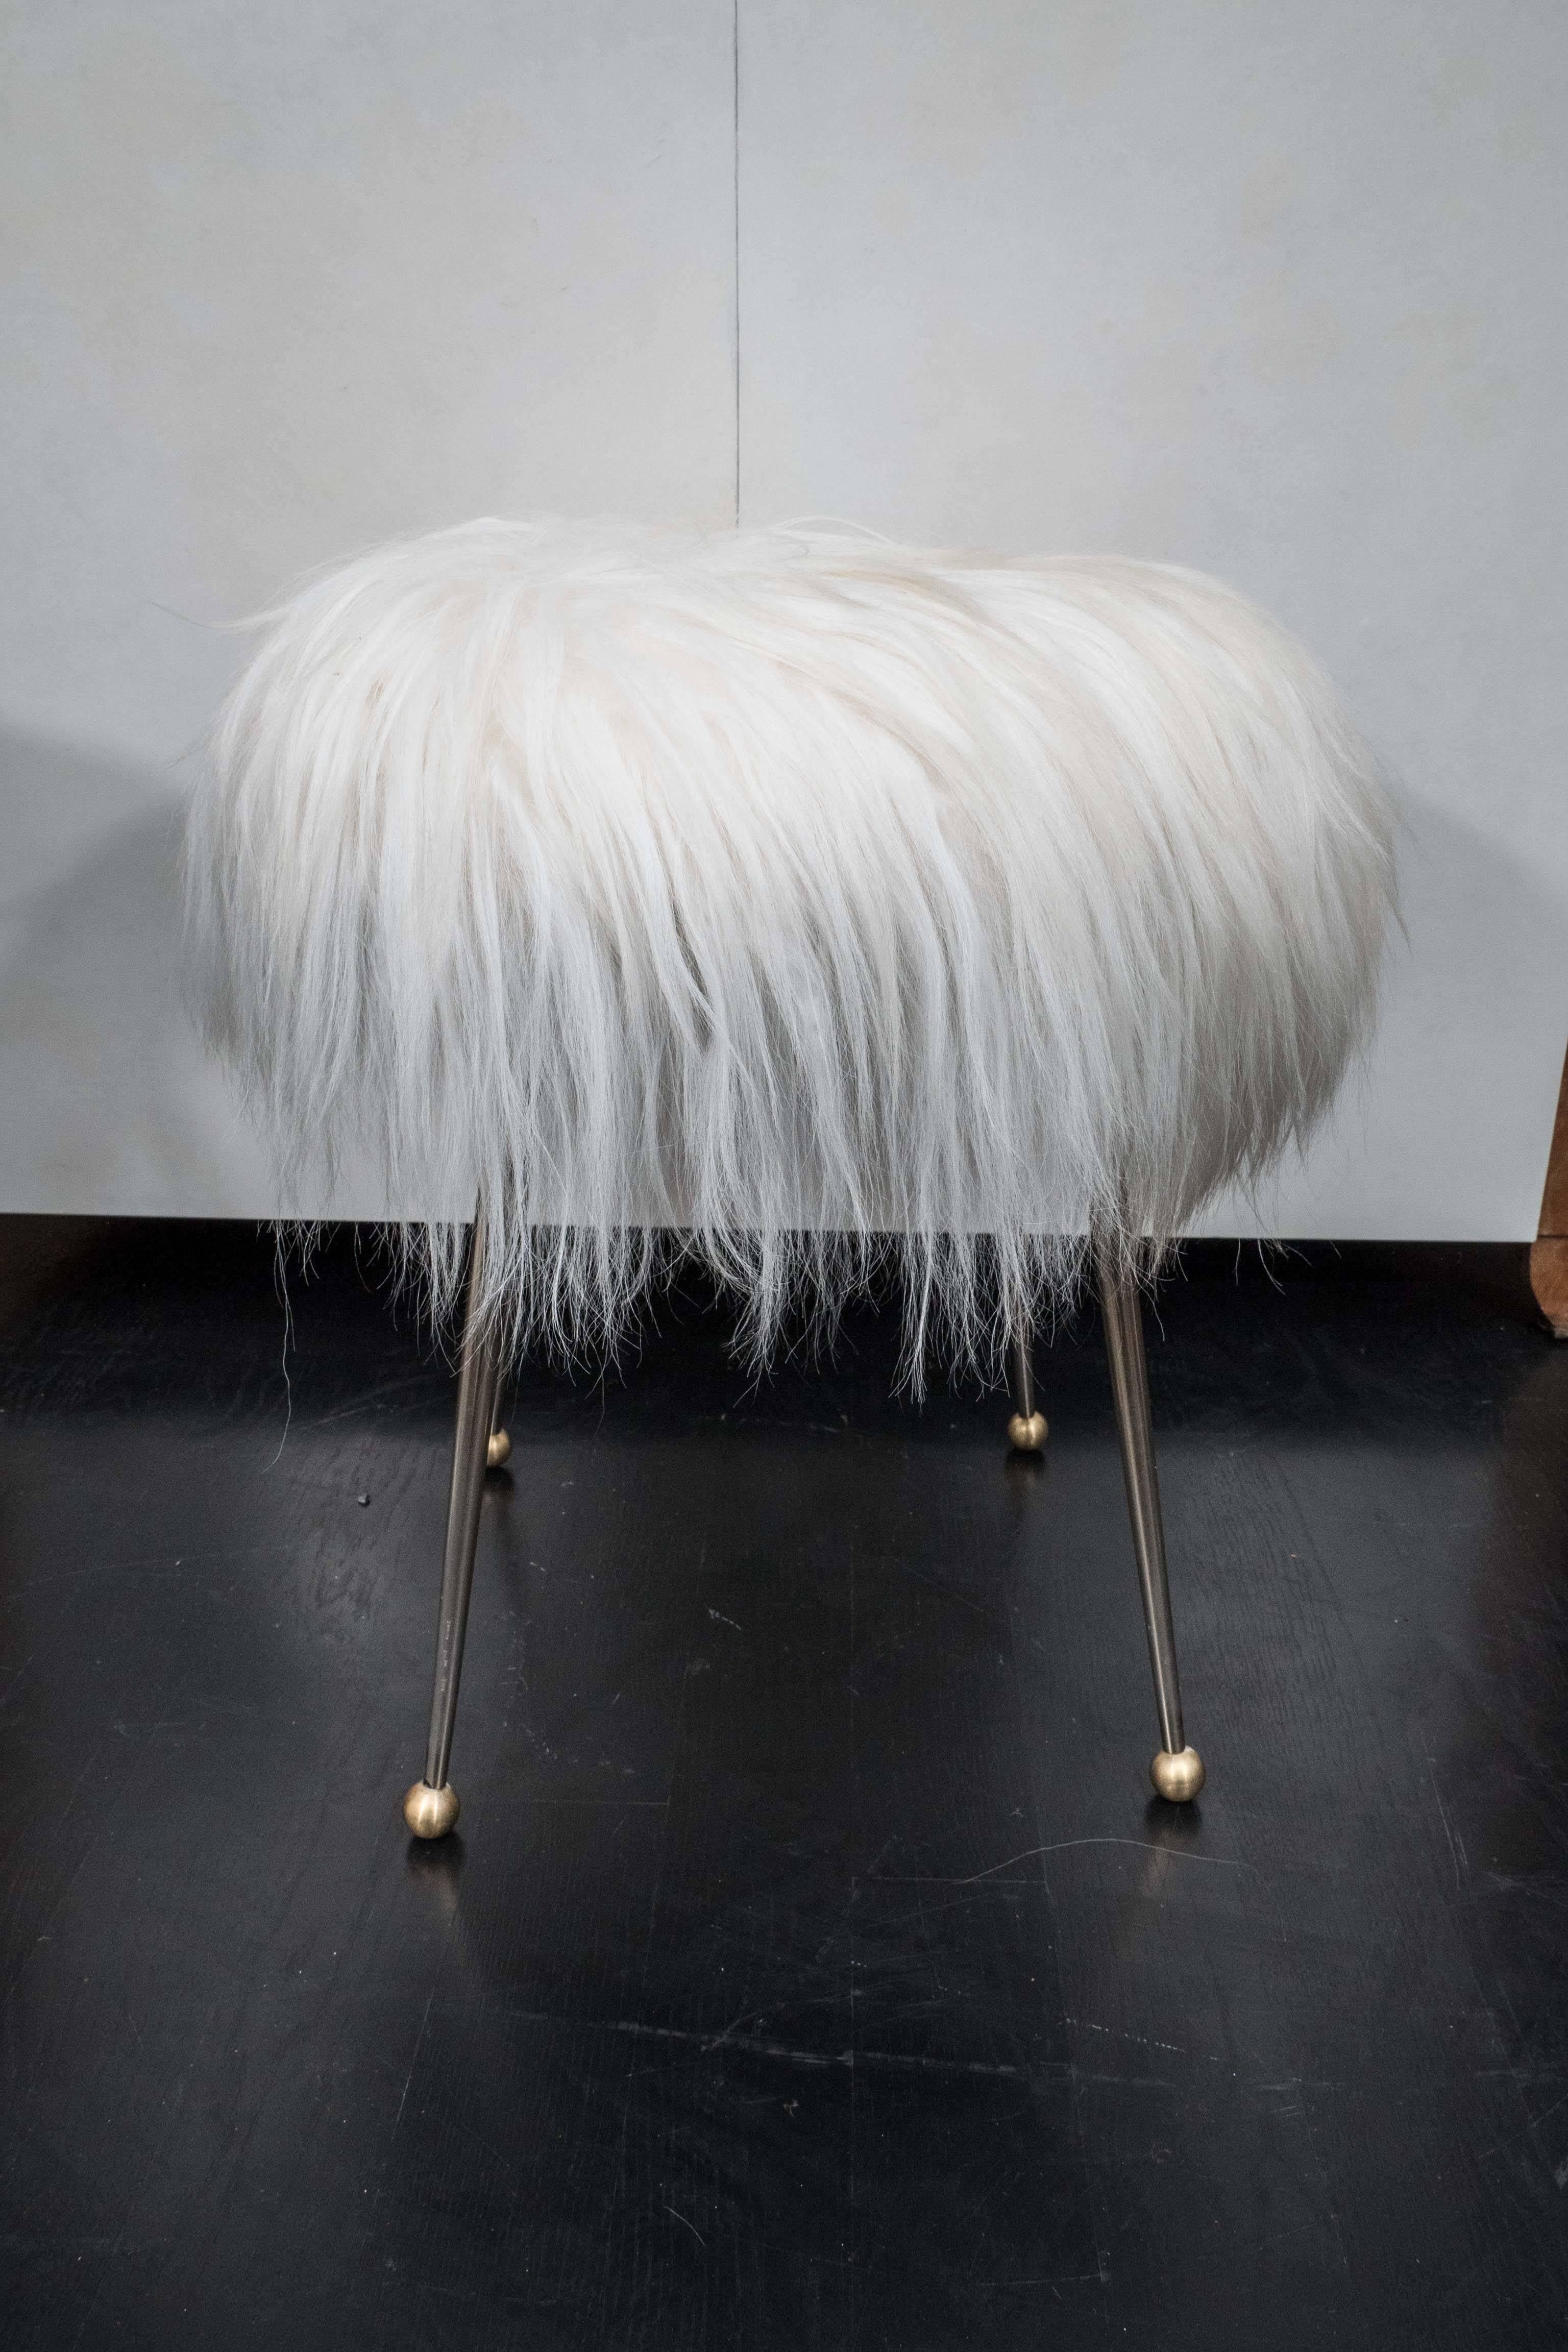 Pair of vintage stools from France. Brass legs with Mongolian fur seats.